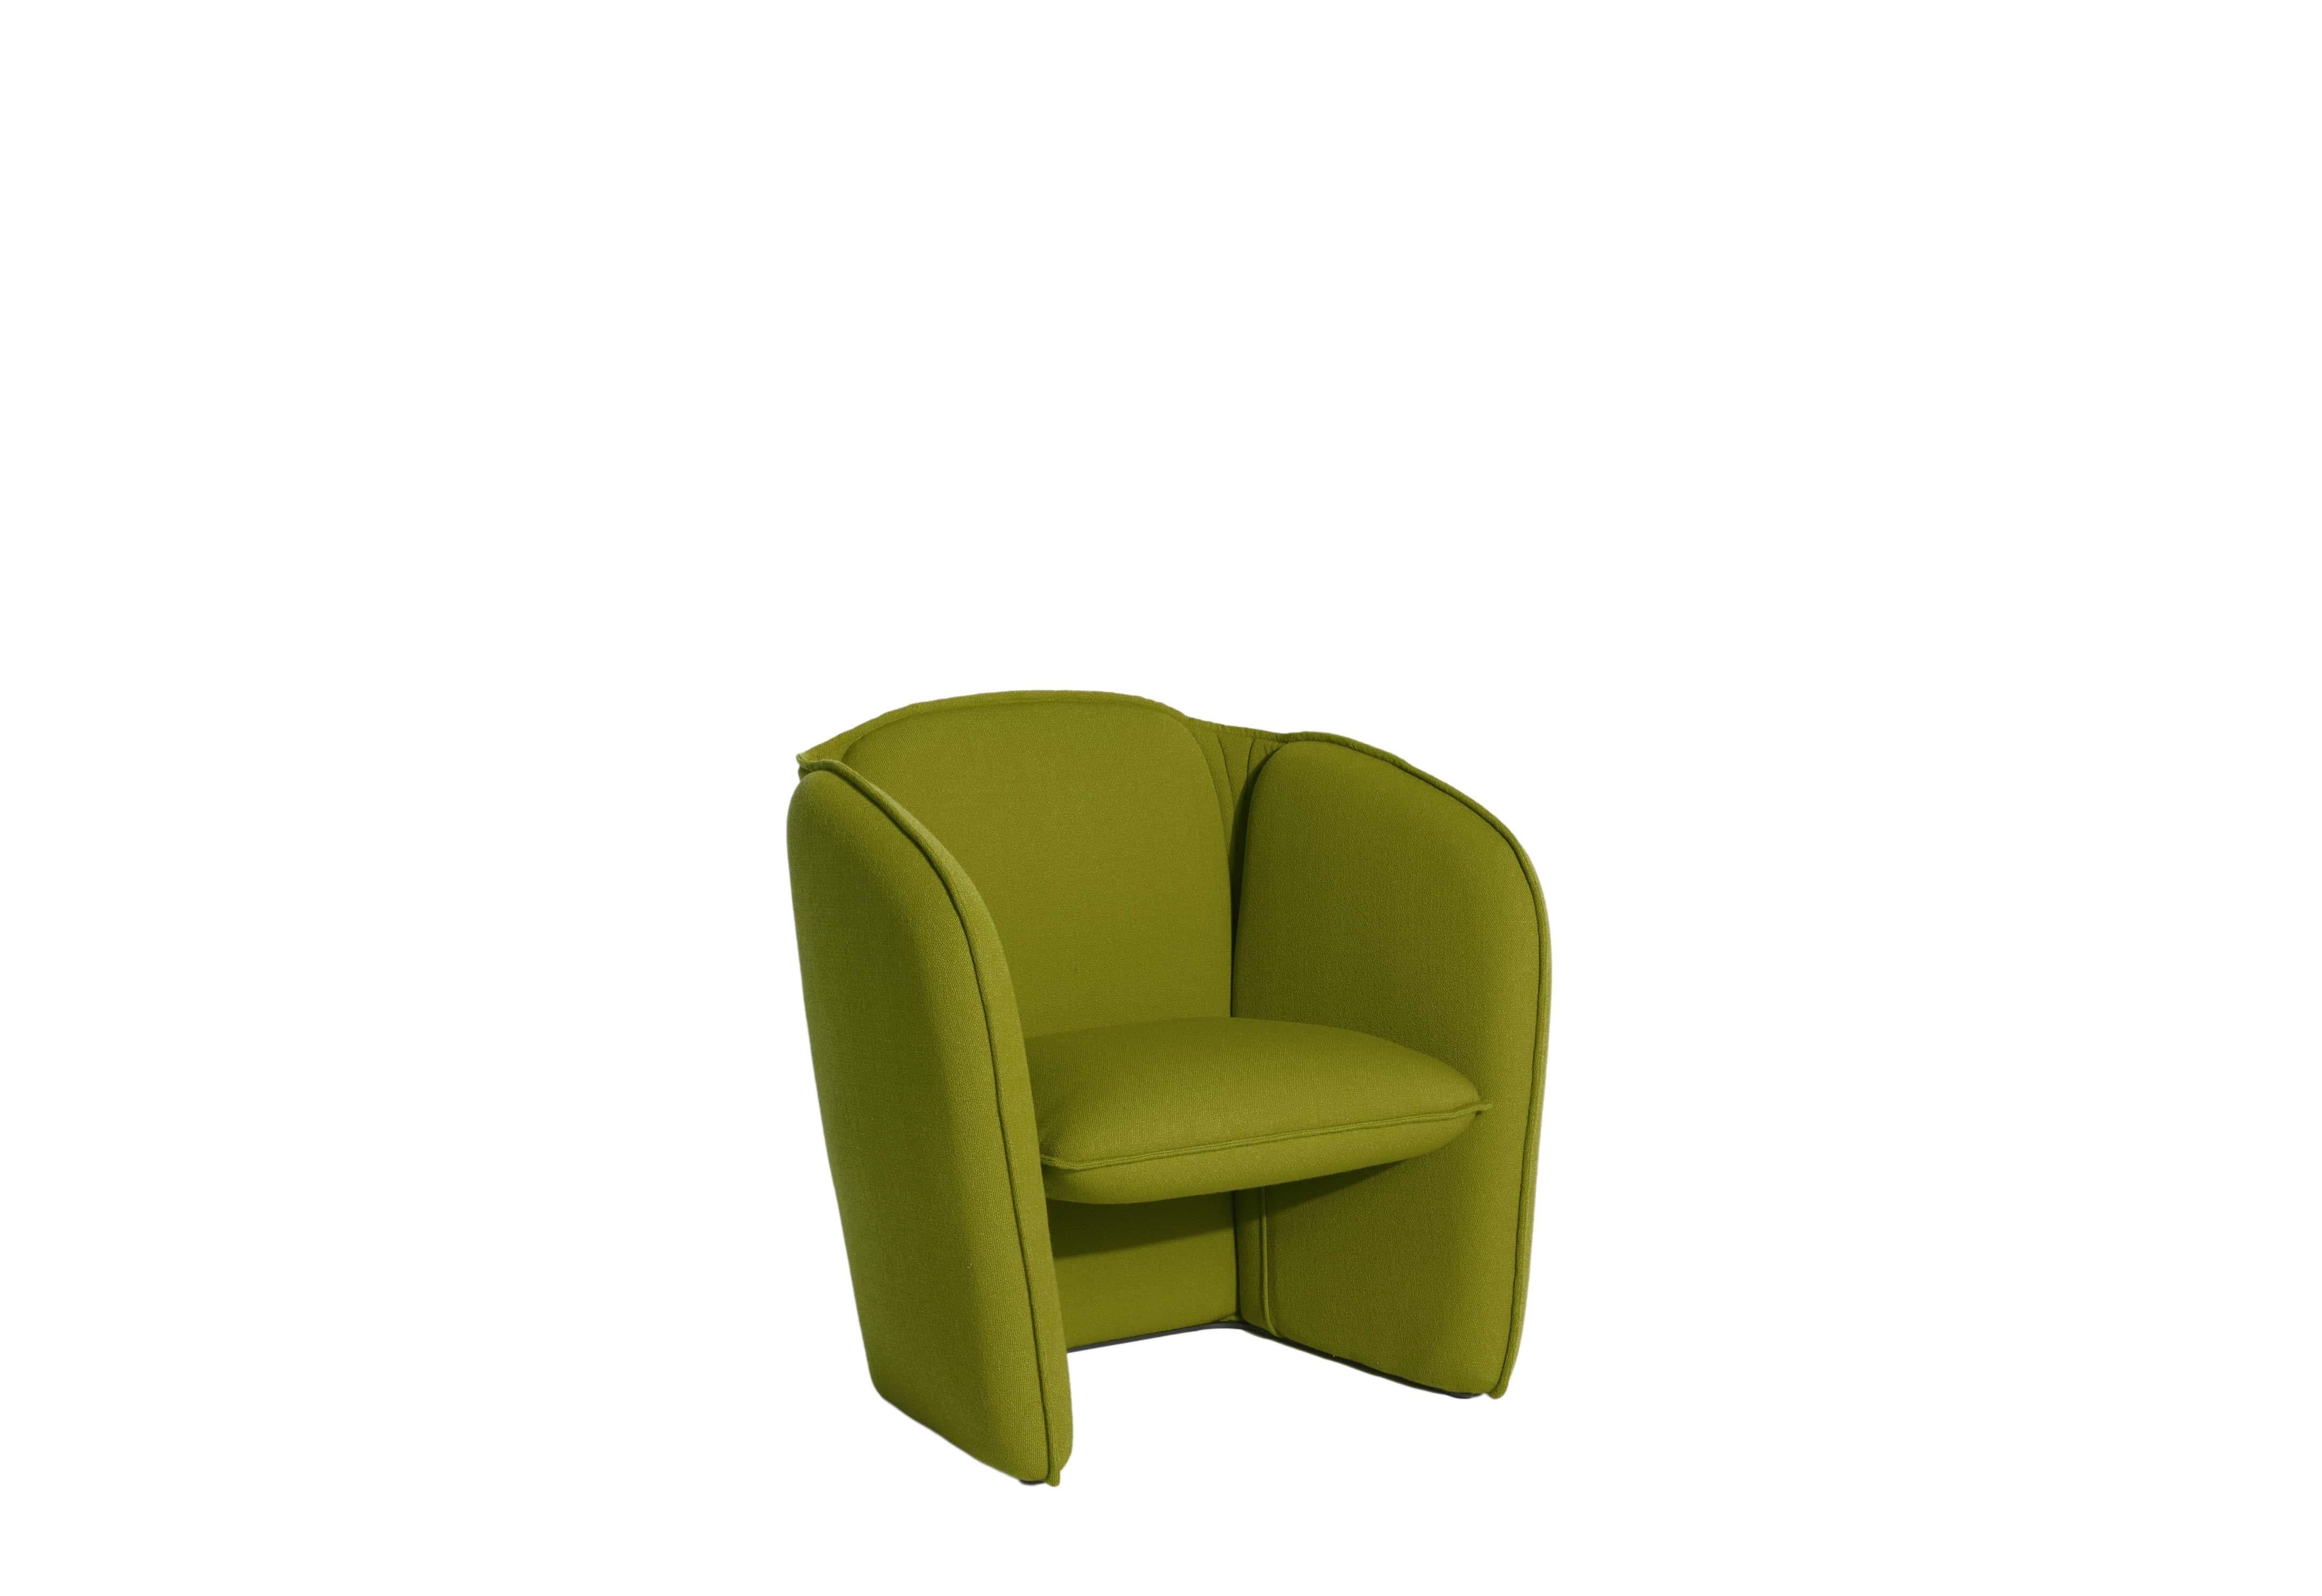 Upholstery Petite Friture Lily Armchair in Olive Green by Färg & Blanche, 2022 For Sale